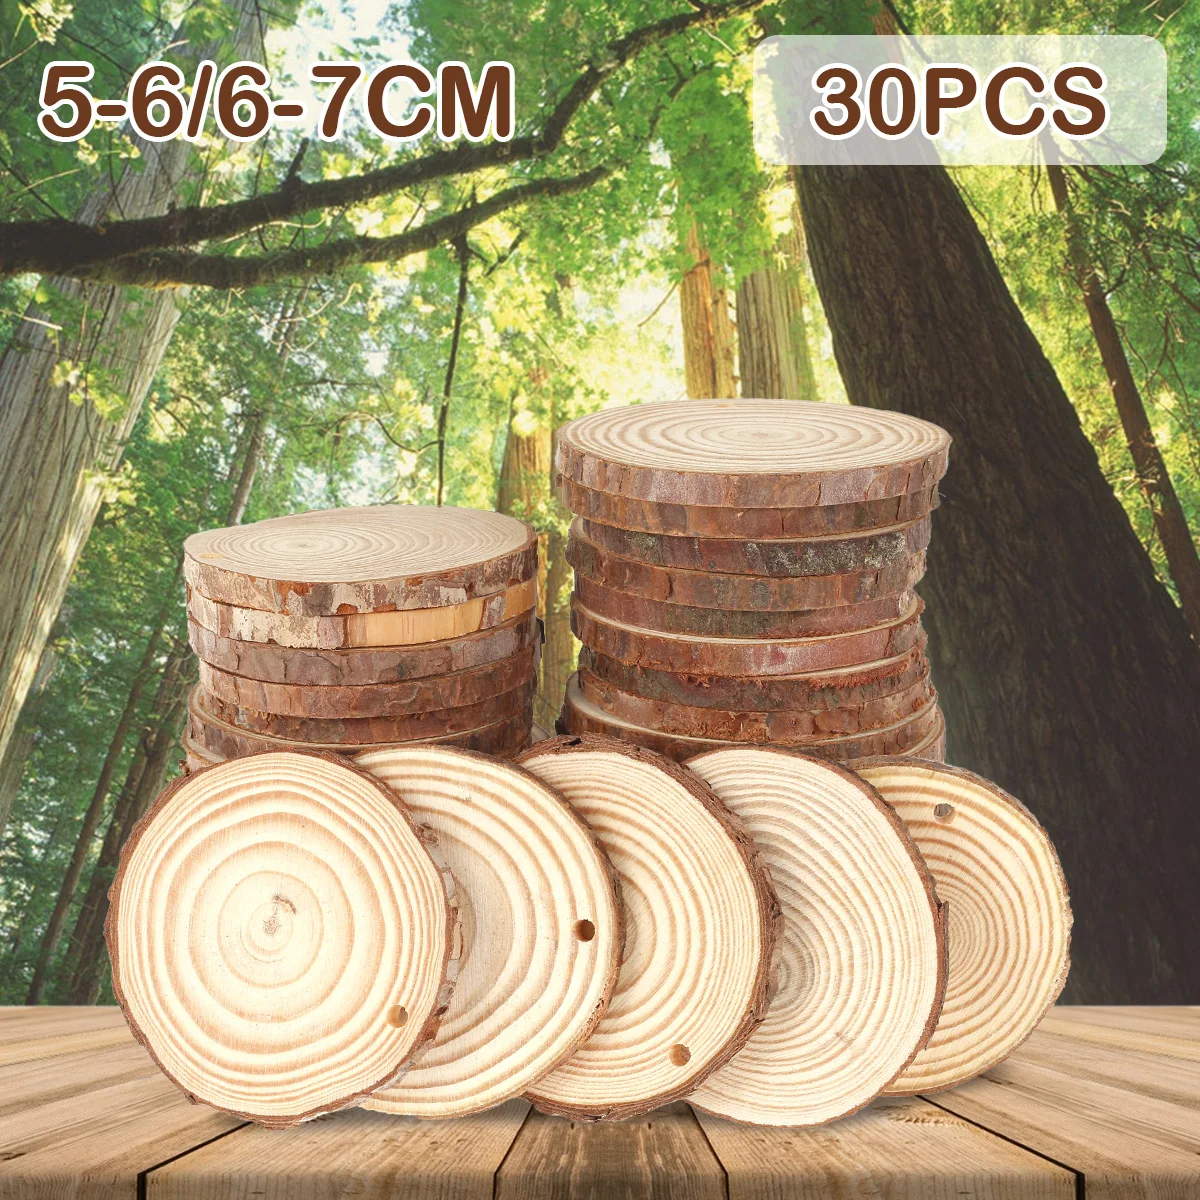 

30pcs Natural Wood Slices Unfinished Wooden Log Kit Predrilled Wood Chip with Rope Round Wooden Circles for Arts Painting DIY